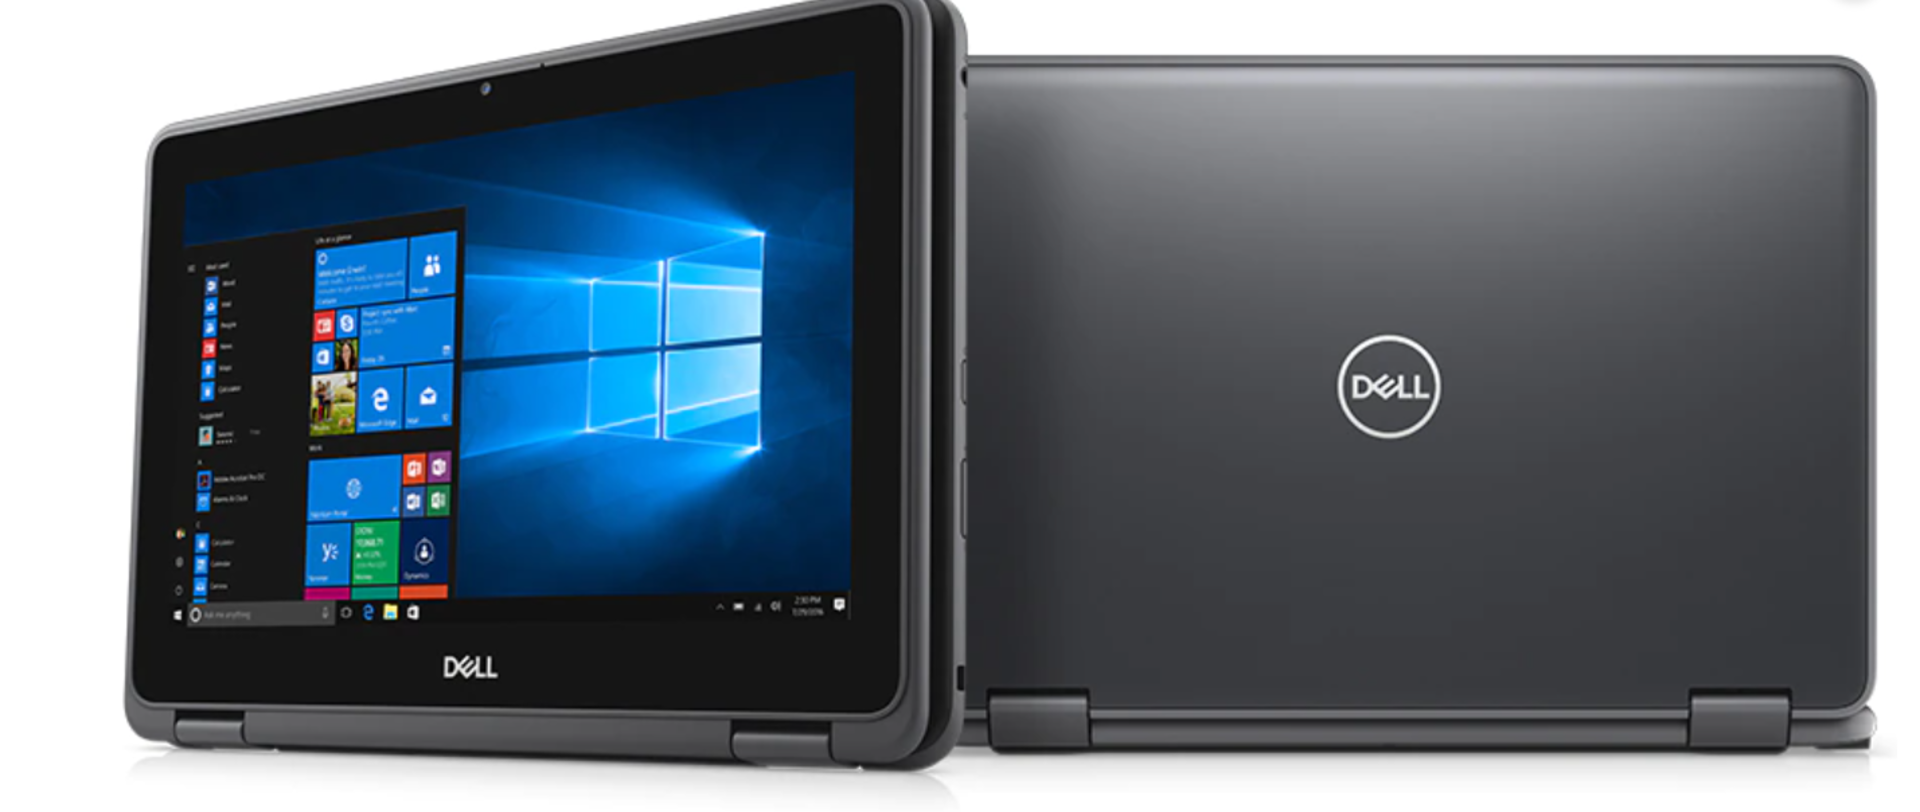 NEW DELL LATITUDE 3190 TWO IN ONE LAPTOP TABLET RRP £495 EACH - Image 2 of 5